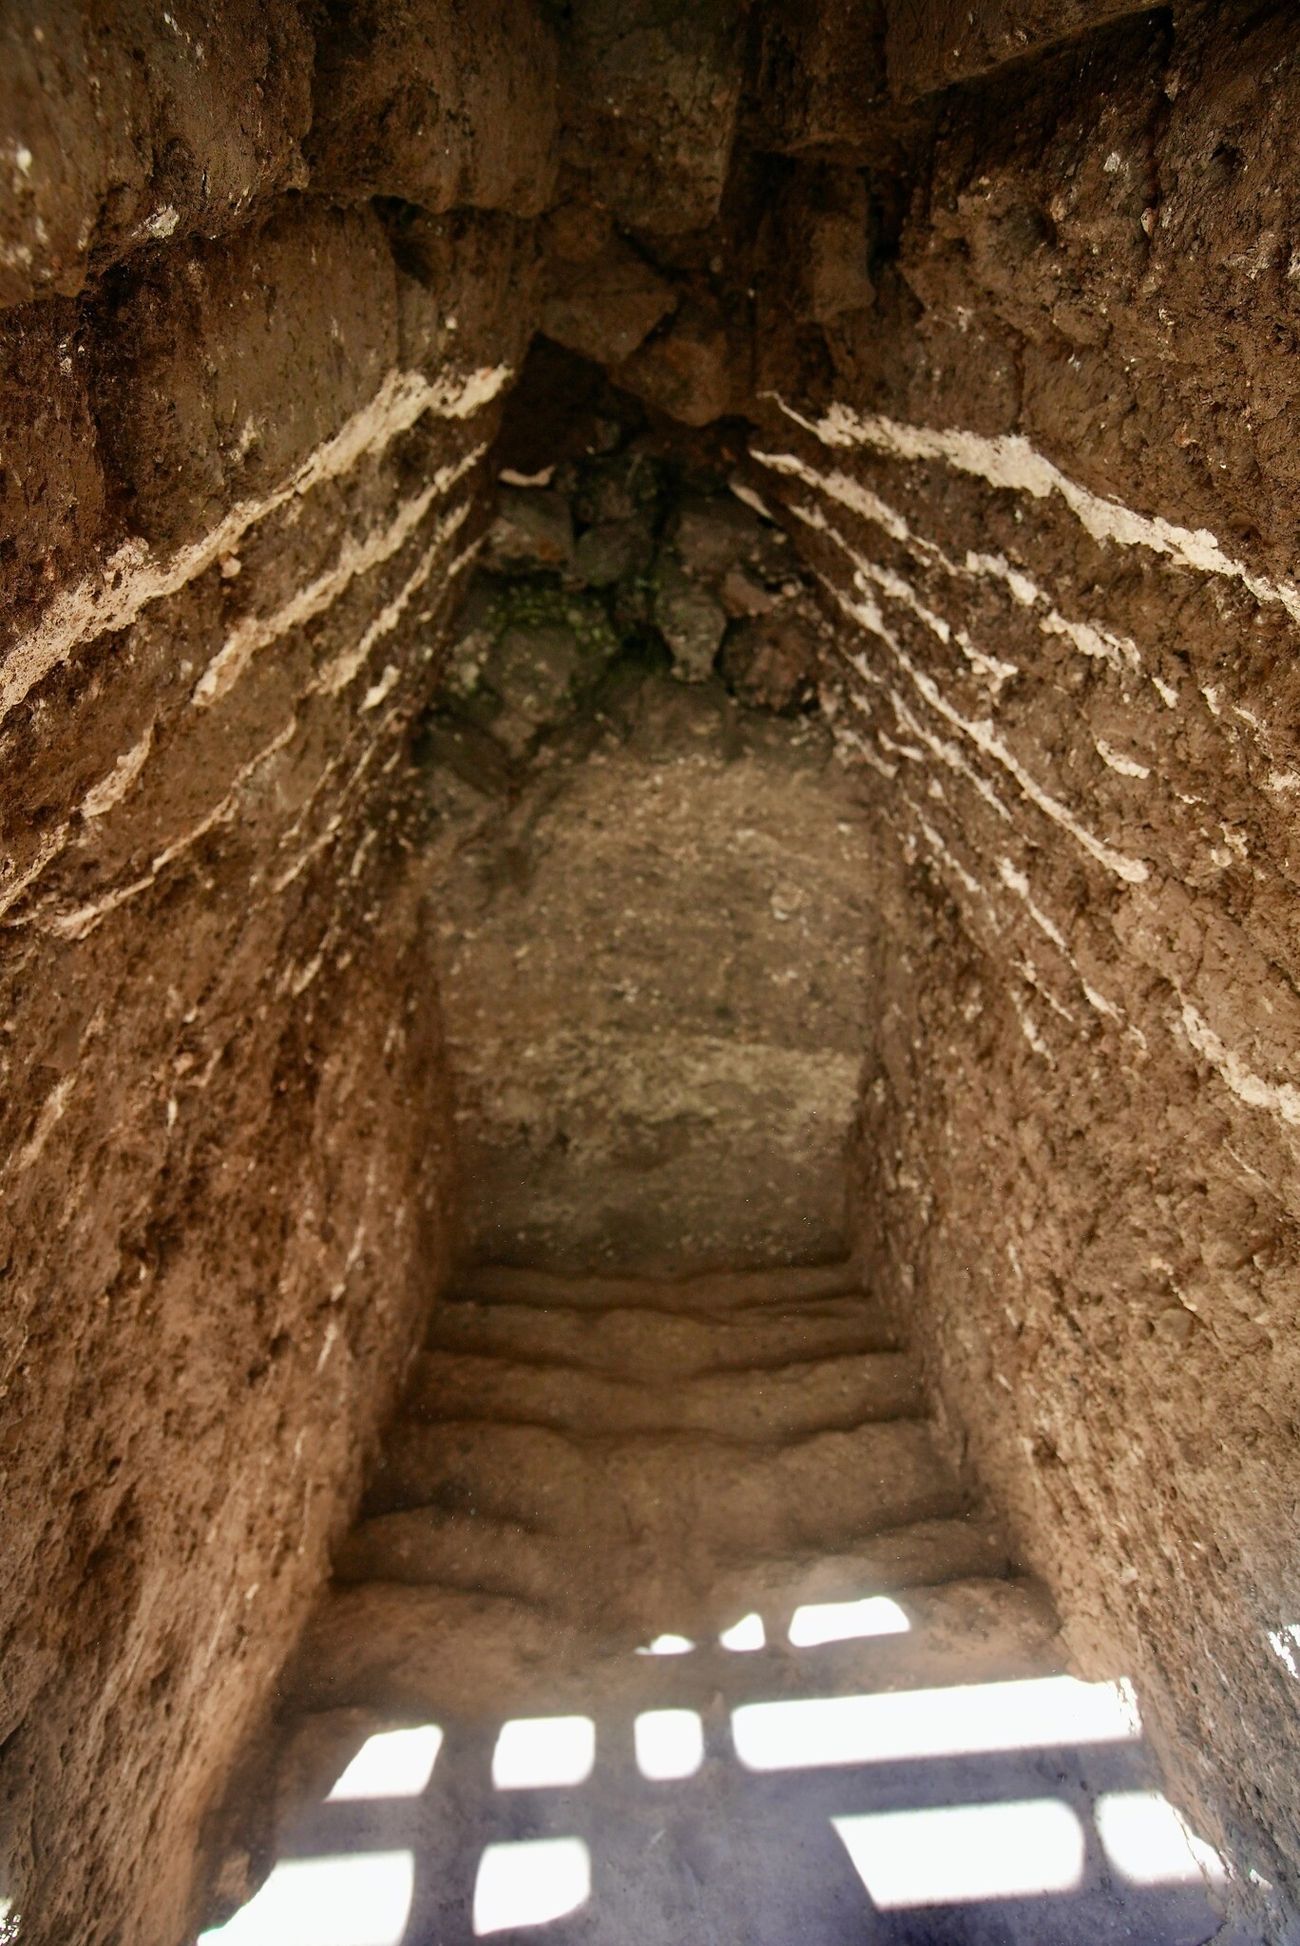 mysterious 3,800-year-old canaanite arch and stairway unearthed in israel